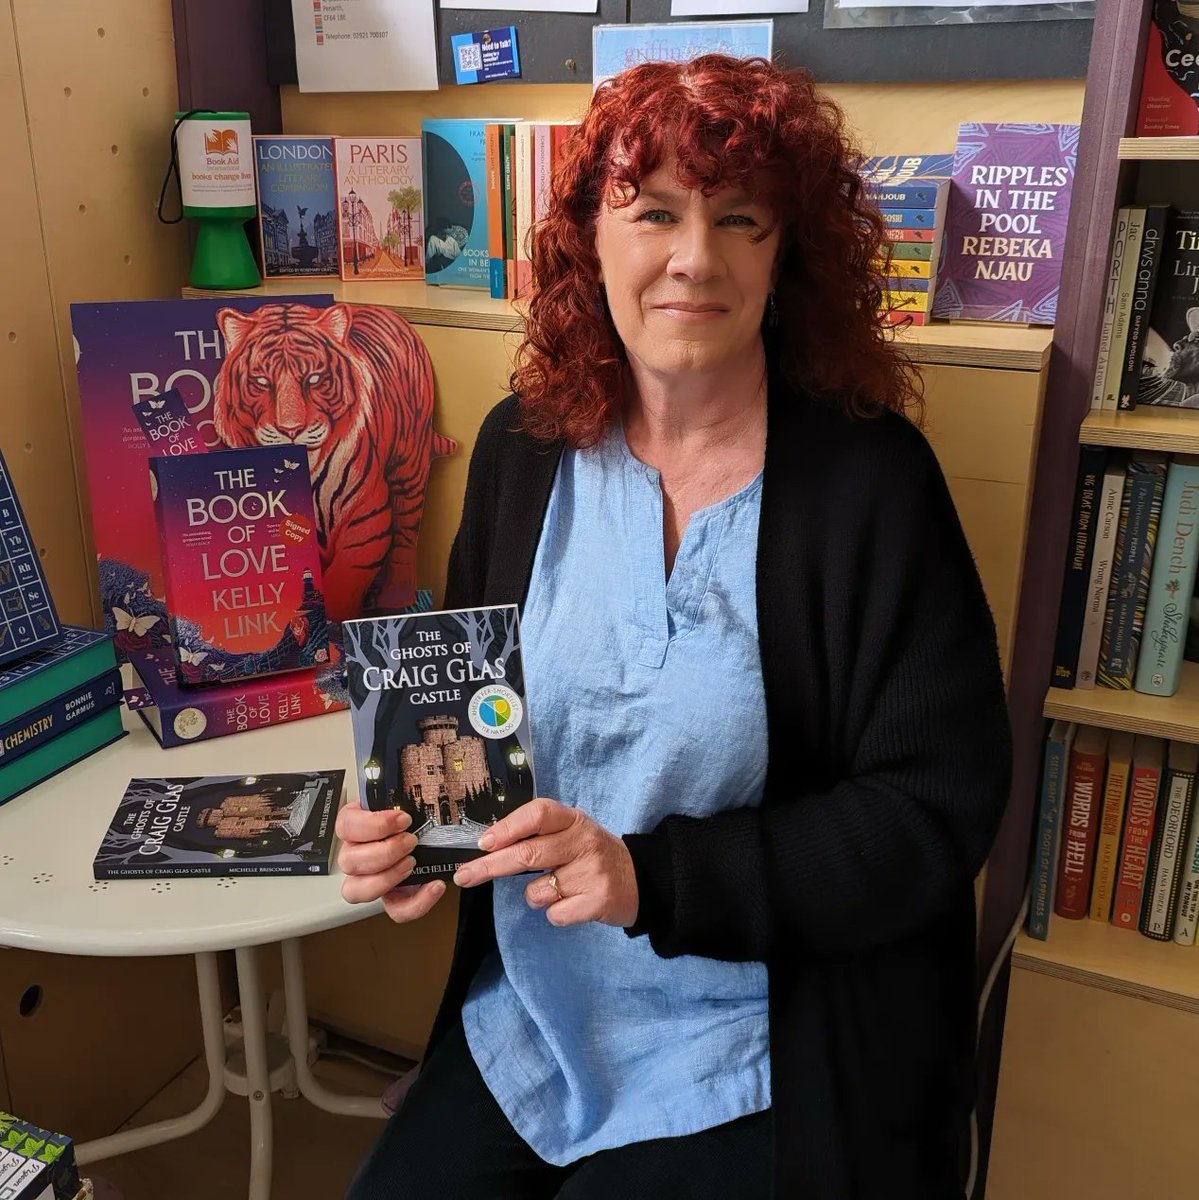 Thank you to @MichelleBrisc for popping in today to sign copies of her Tir na n-Og shortlisted novel 'The Ghosts of Craig Glas Castle'! How lovely to meet a brilliant local author - we have signed copies in the shop now 📚😊